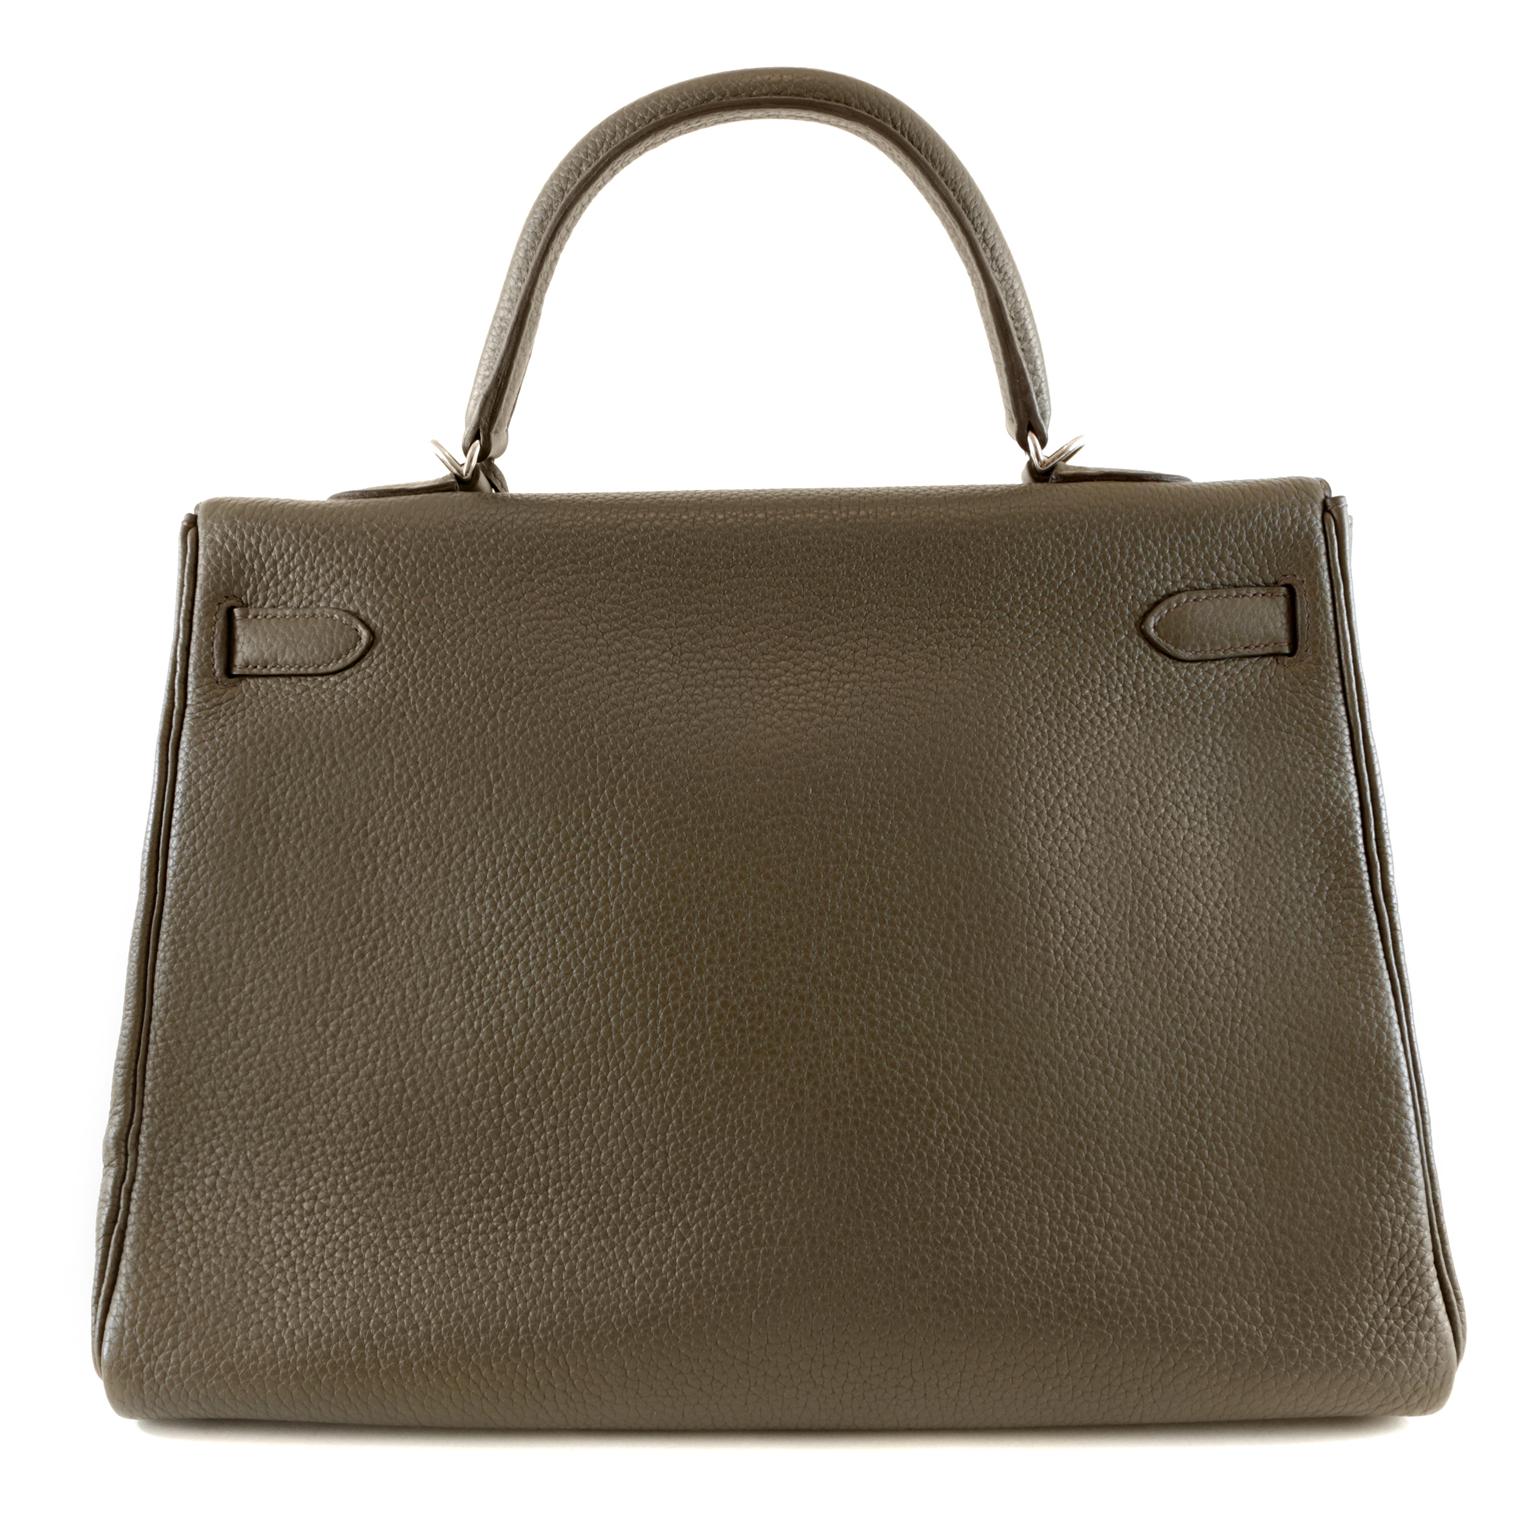 Hermès Graphite Clemence 35 cm  Kelly - MINT condition
 Hermès bags are considered the ultimate luxury item worldwide.  Each piece is handcrafted with waitlists that can exceed a year or more.  Graphite is a highly desirable neutral  that combines